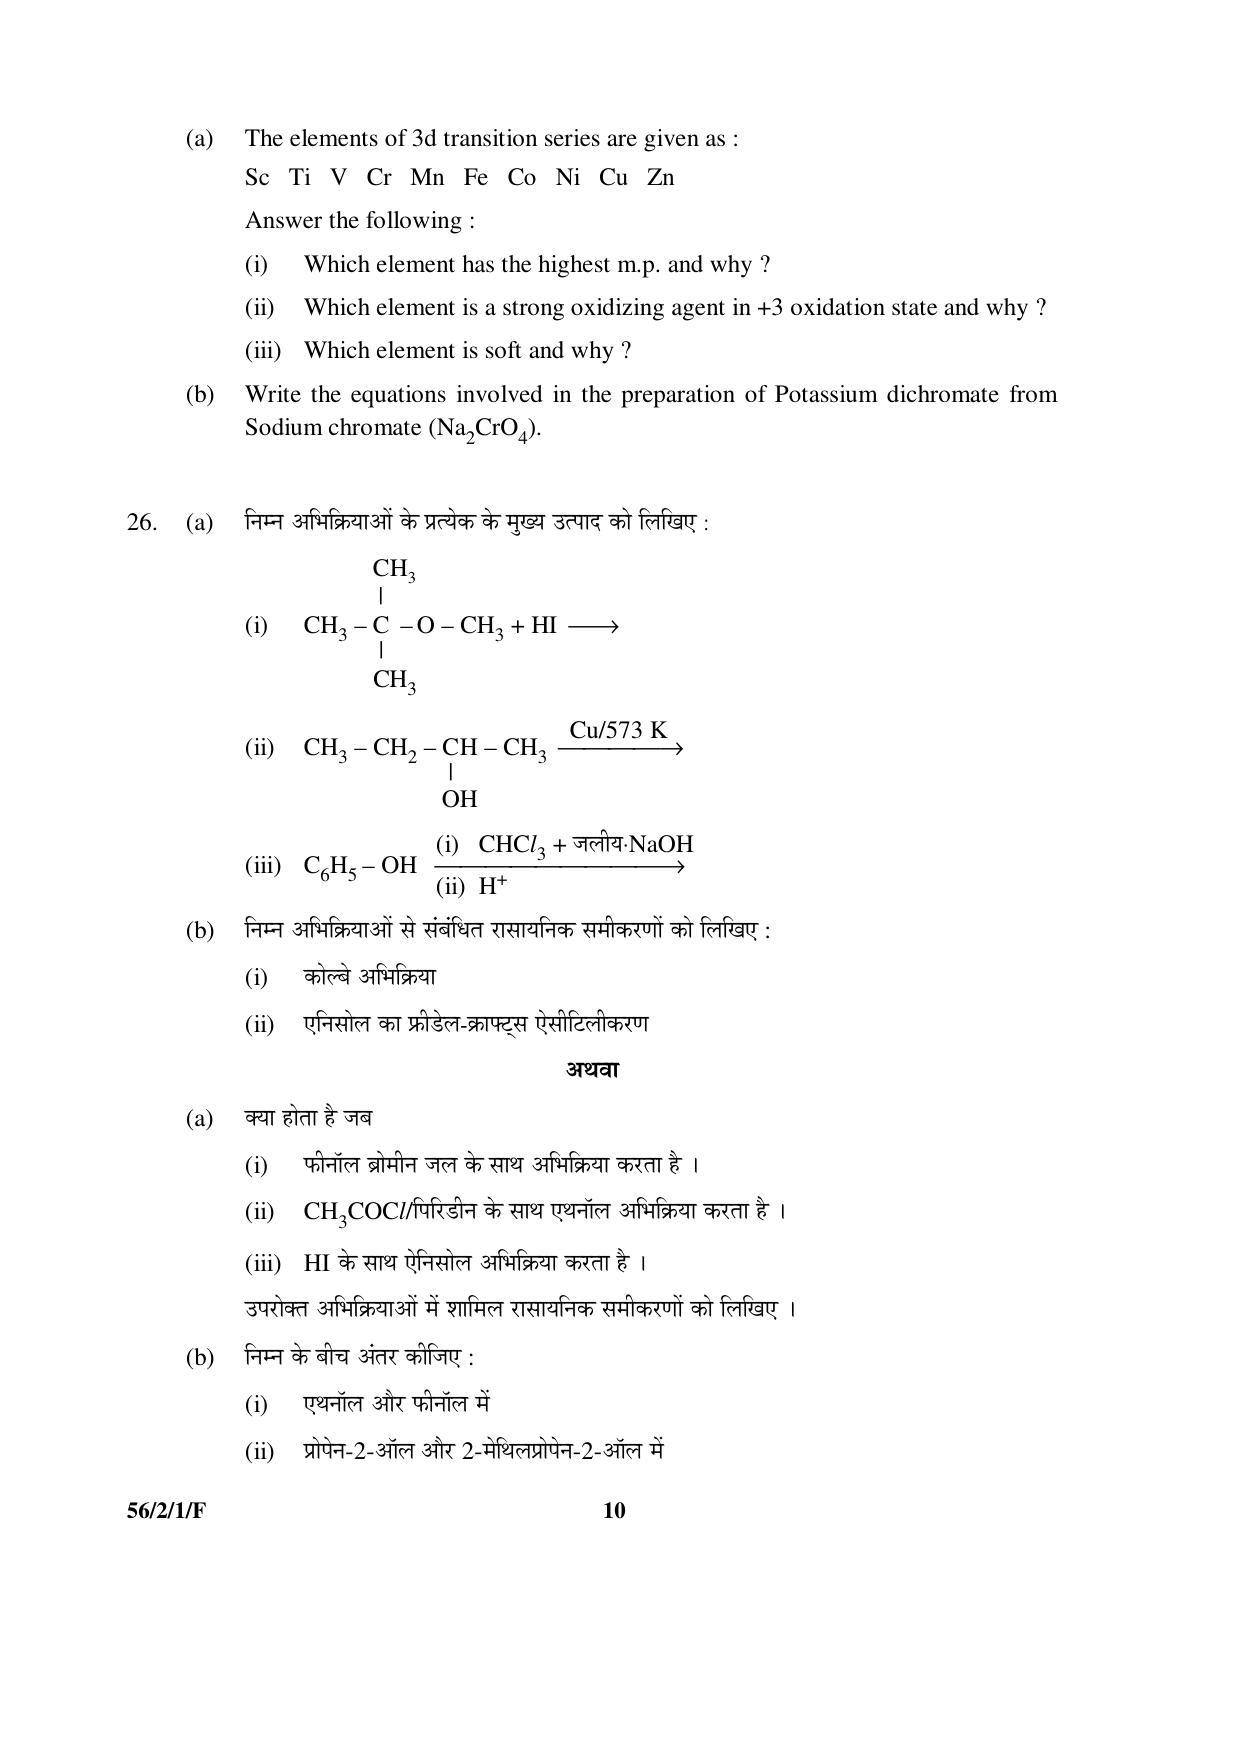 CBSE Class 12 56-2-1-F _Chemistry_ 2016 Question Paper - Page 10